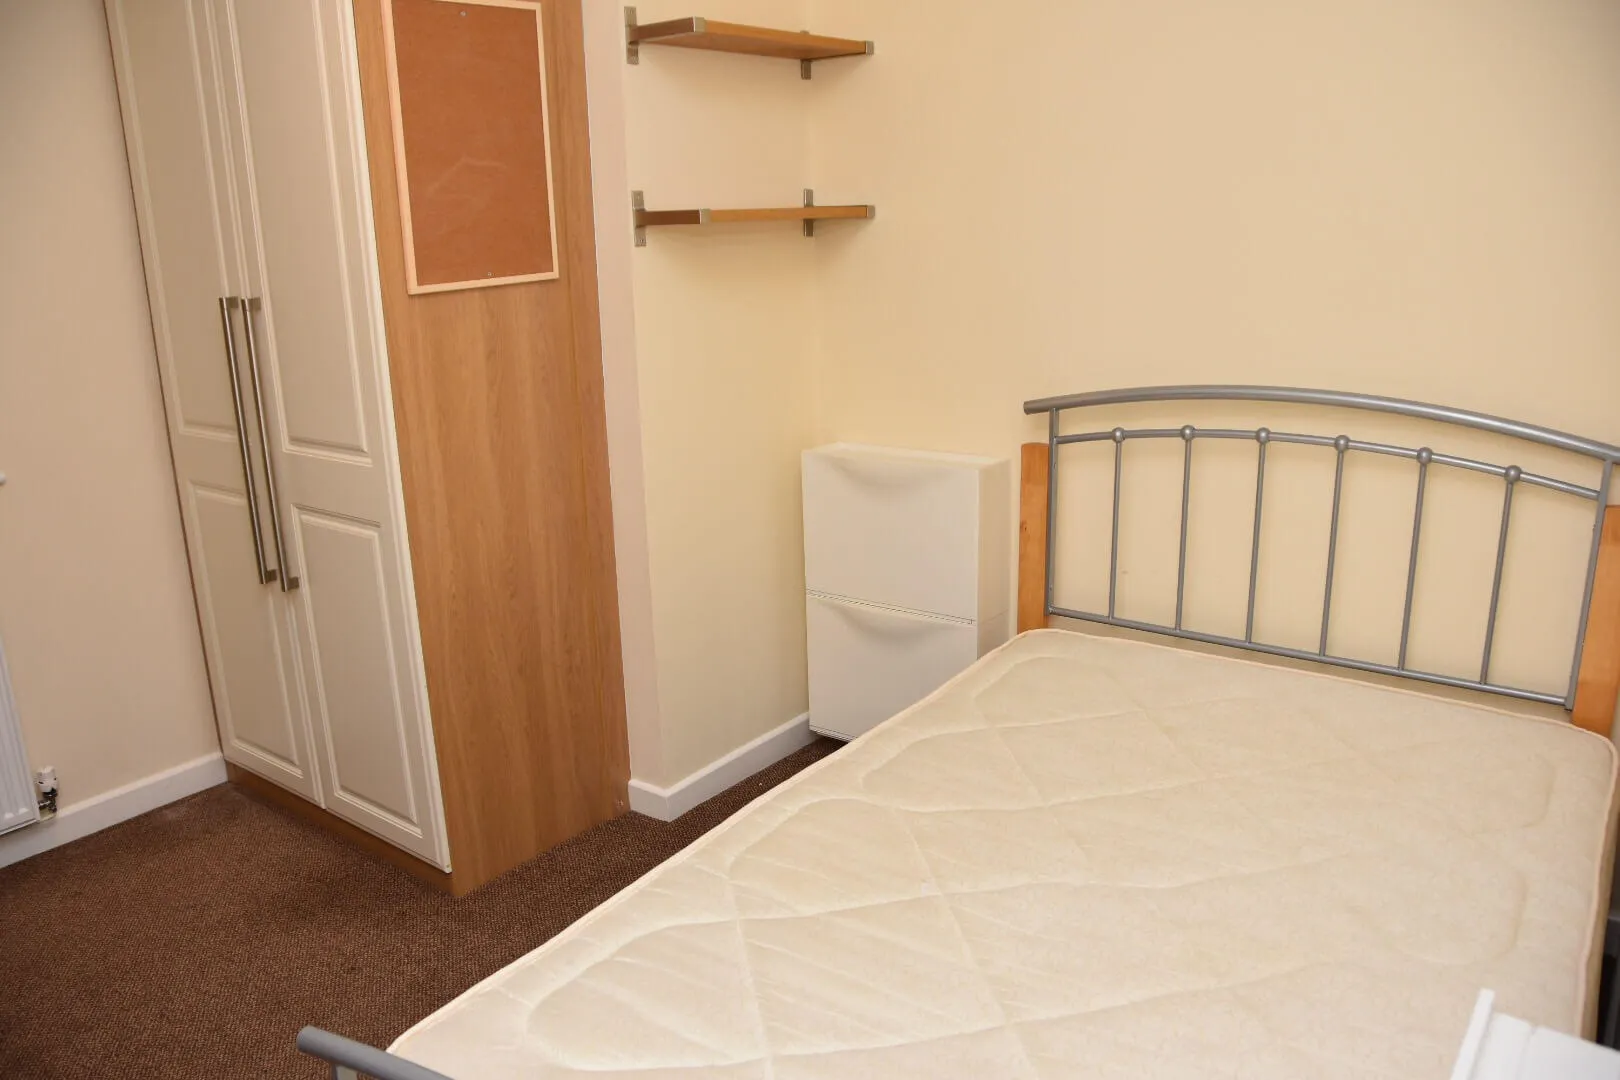 Comfortable & Convenient Residence: Get Suitable Shared Private Student Accommodation in Ormskirk